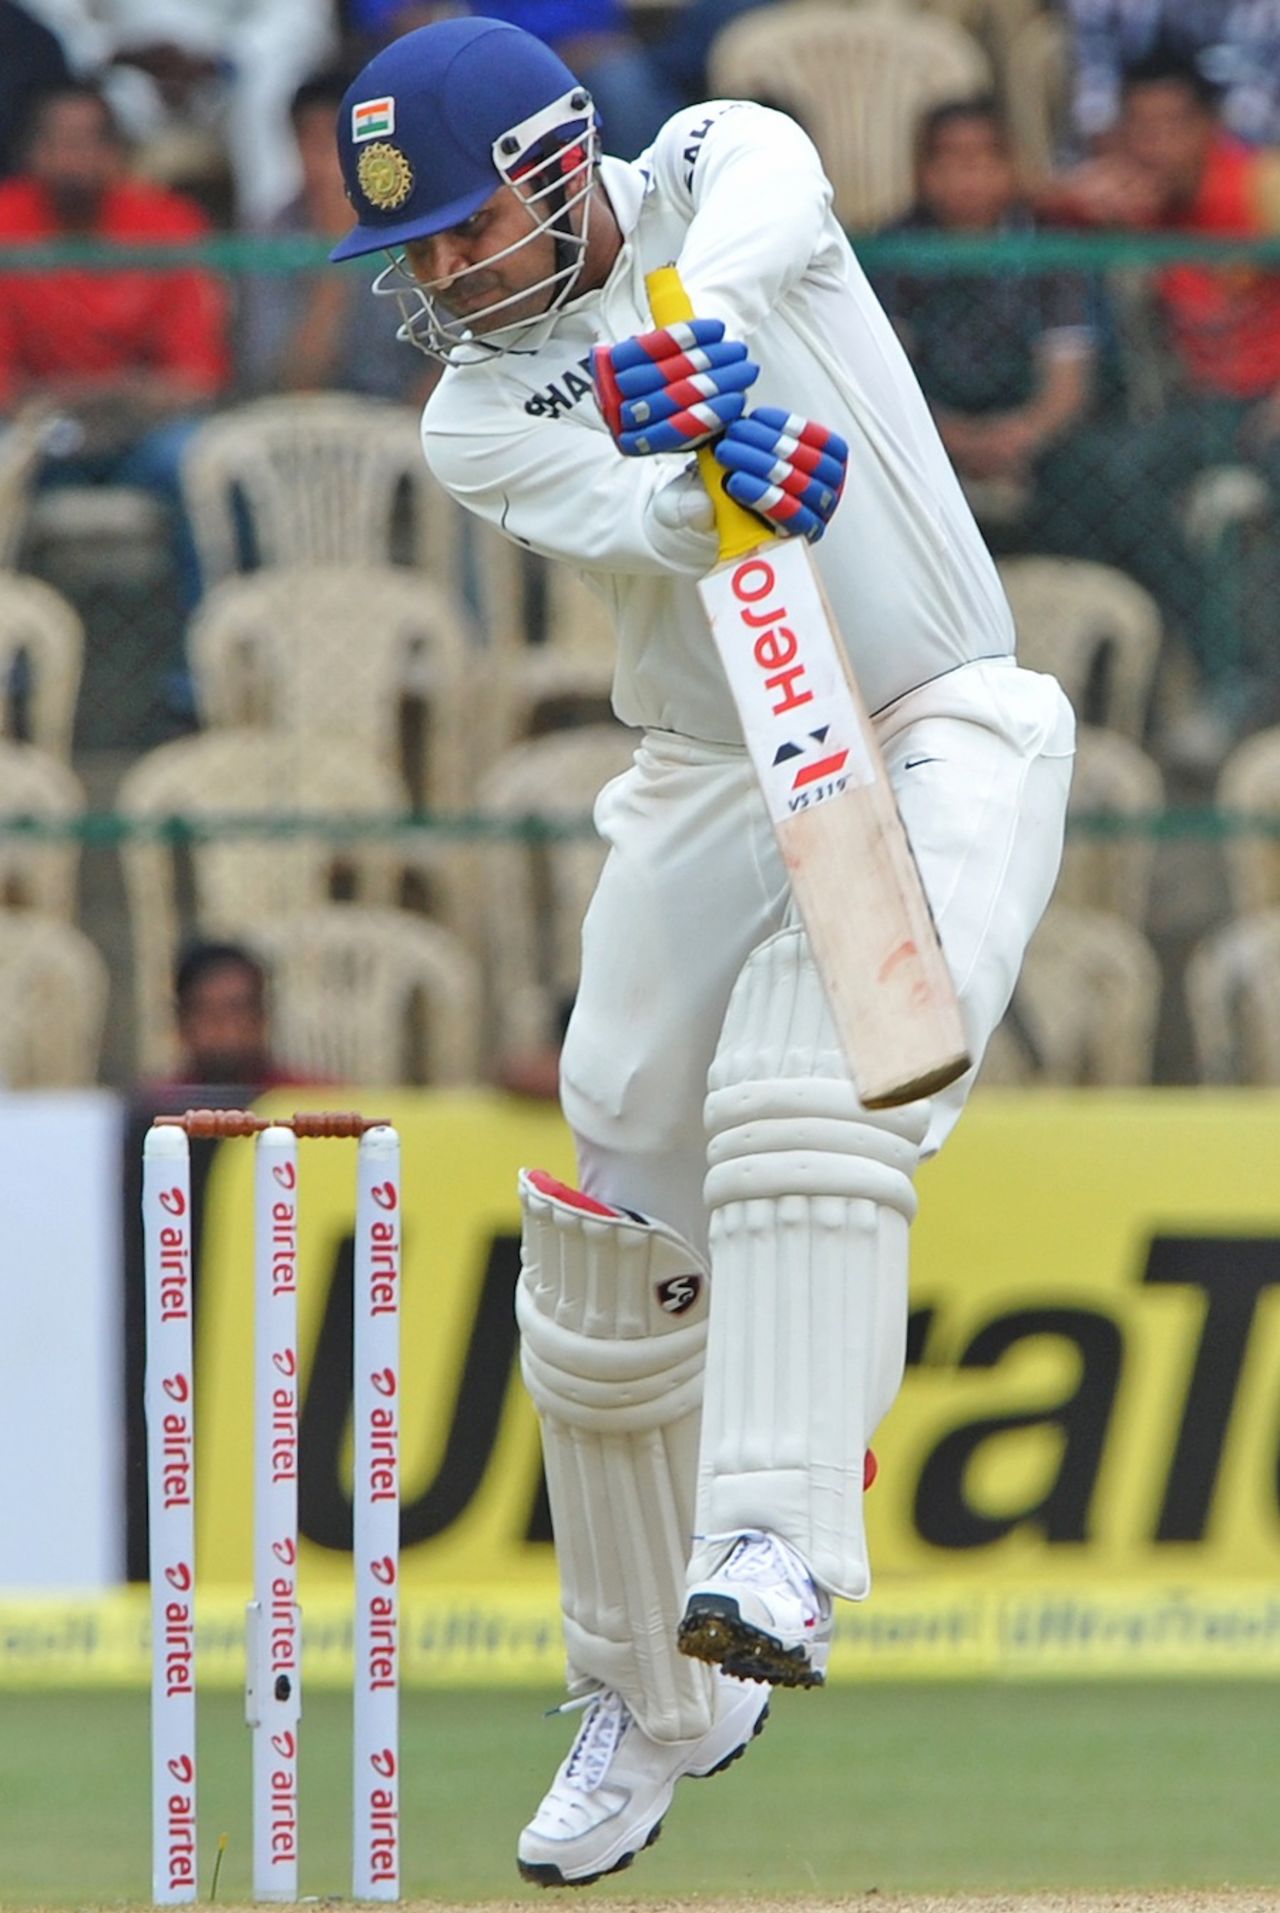 Virender Sehwag punches one through off-side, India v New Zealand, 2nd Test, Bangalore, 2nd day, September 1, 2012